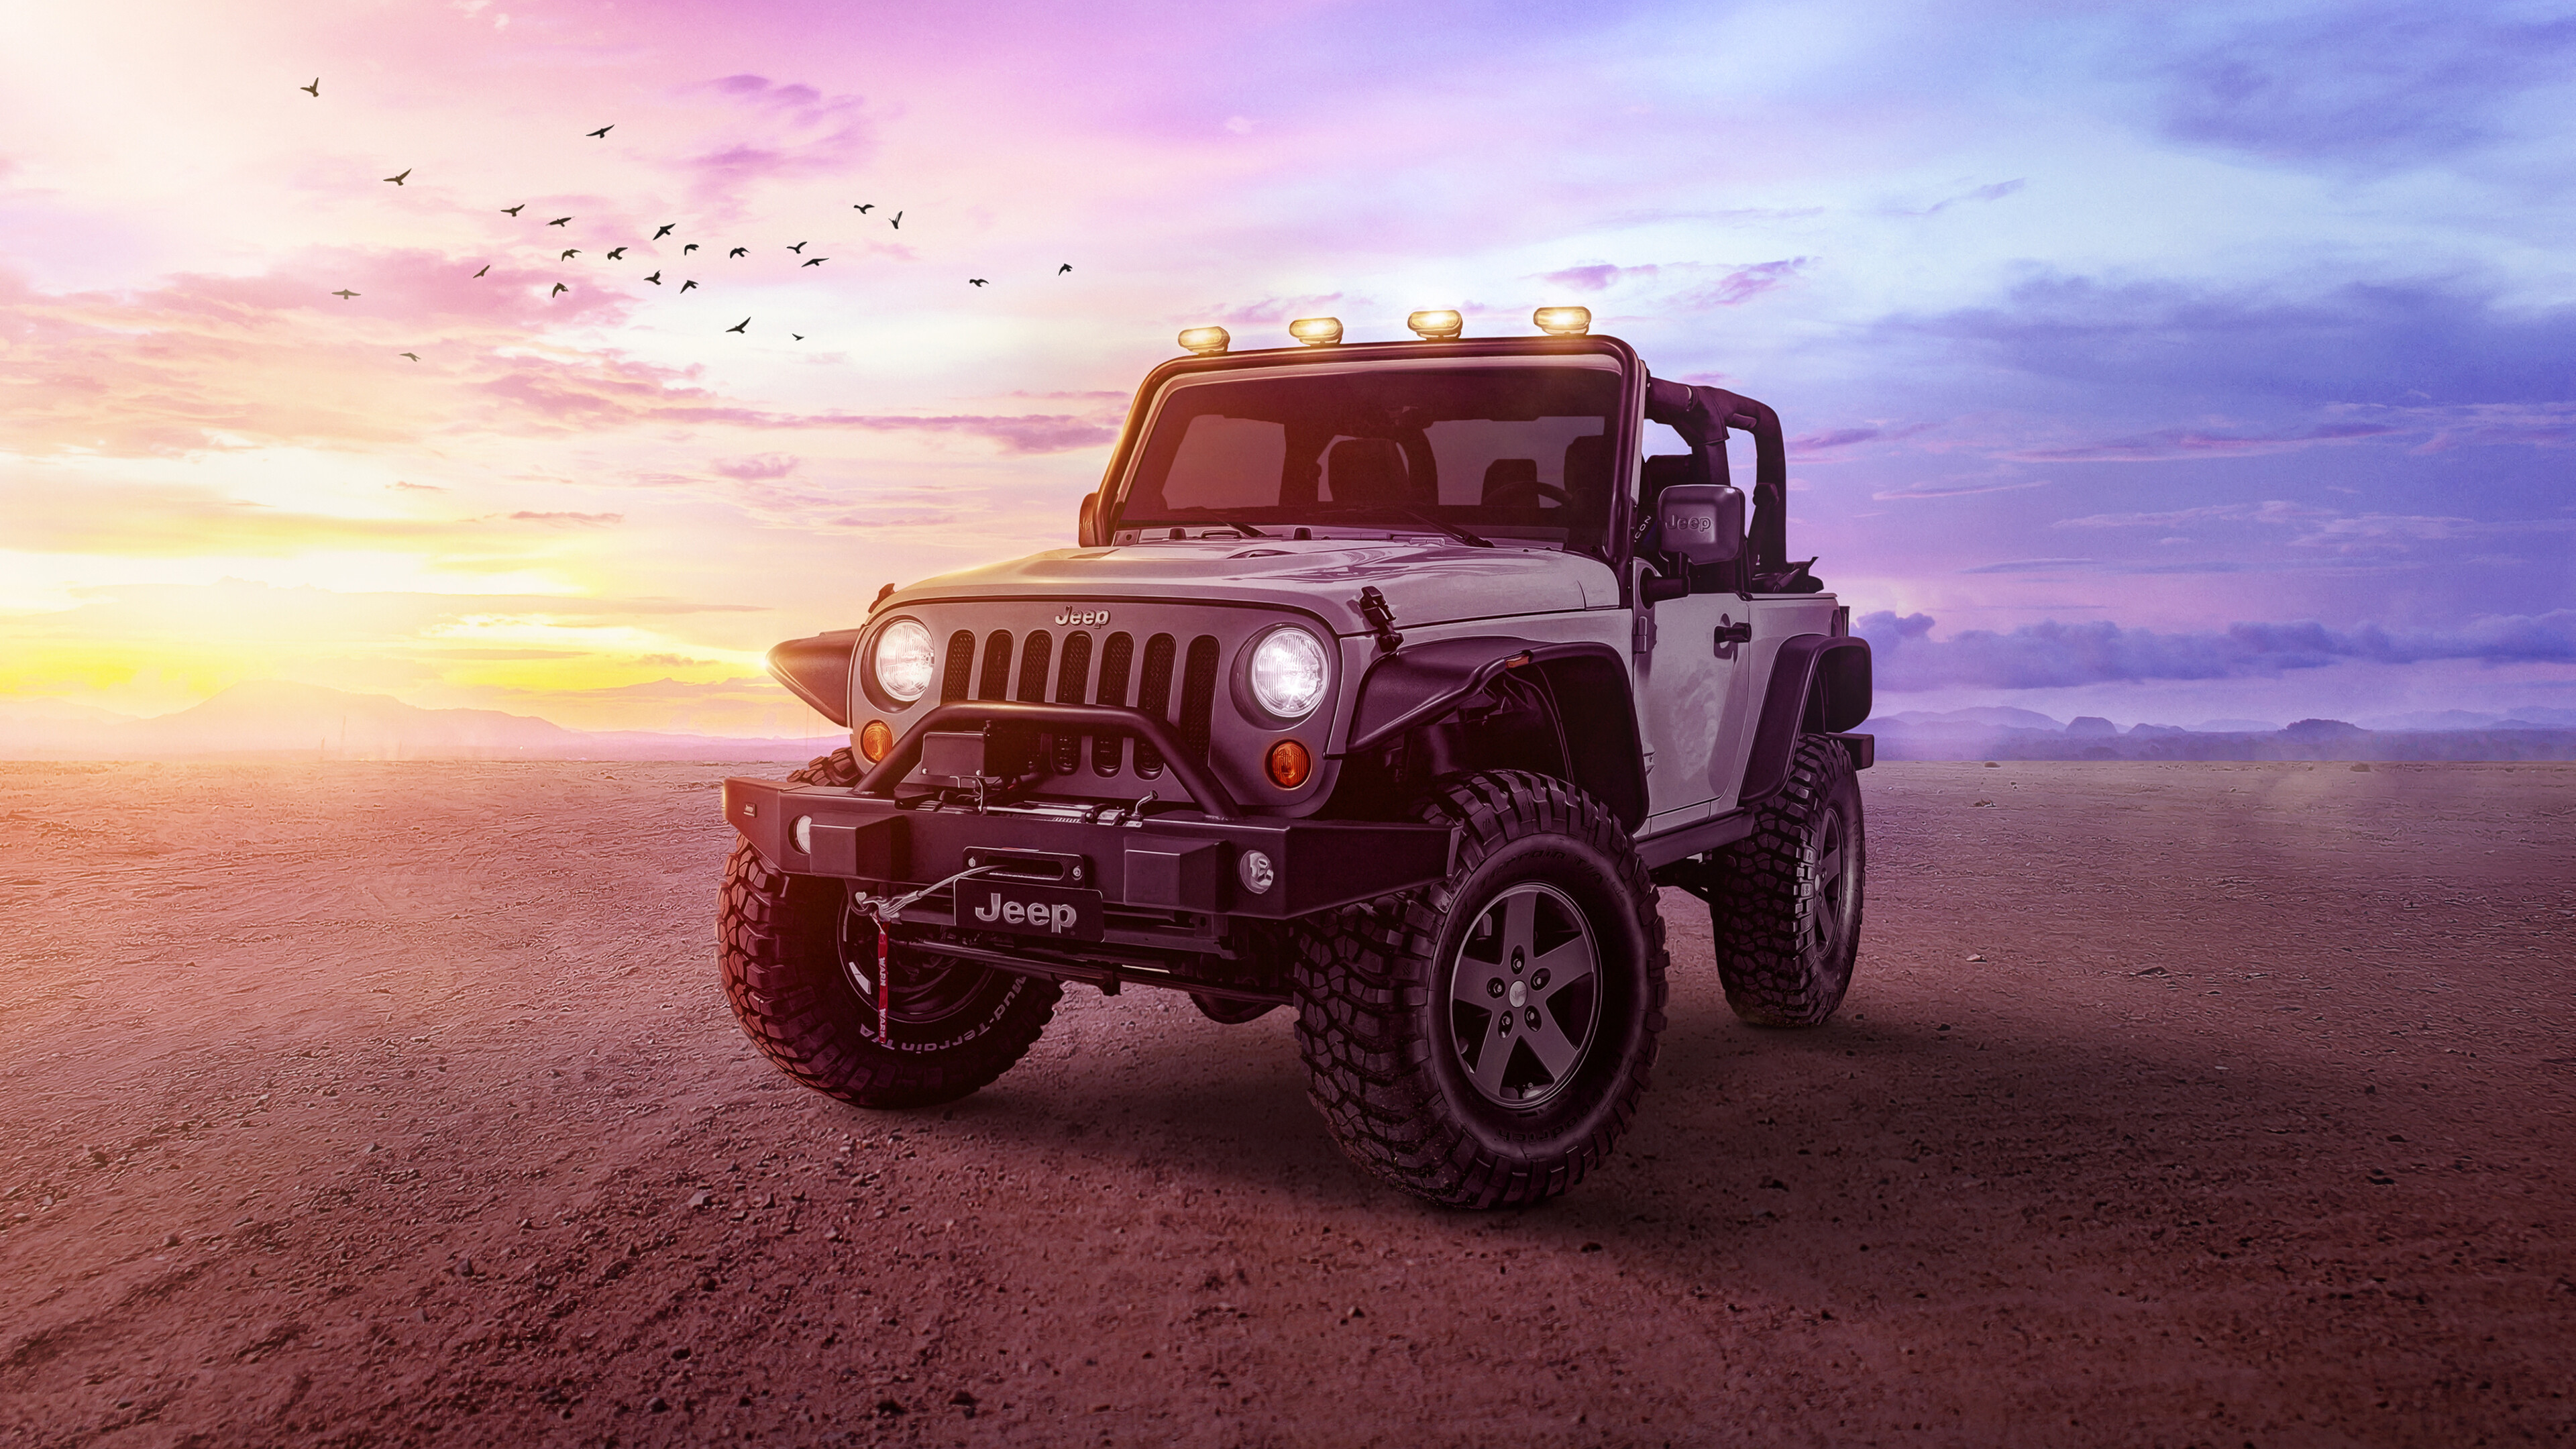 Jeep Wrangler: A series of compact off-road SUVs manufactured by since 1986. 3840x2160 4K Wallpaper.